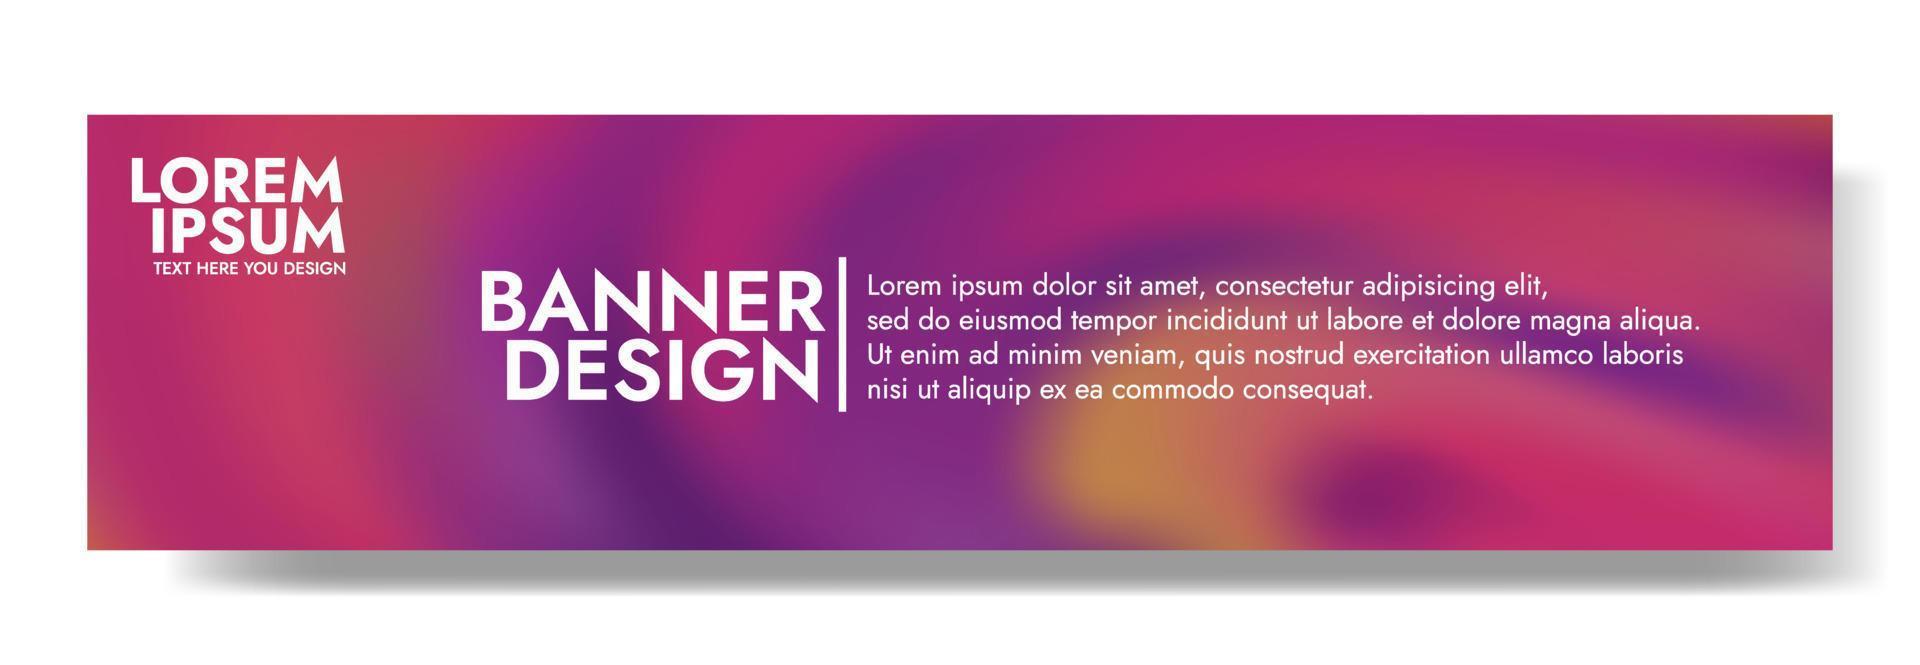 Abstract violet yellow and red Gradient mesh Banner Template. vector